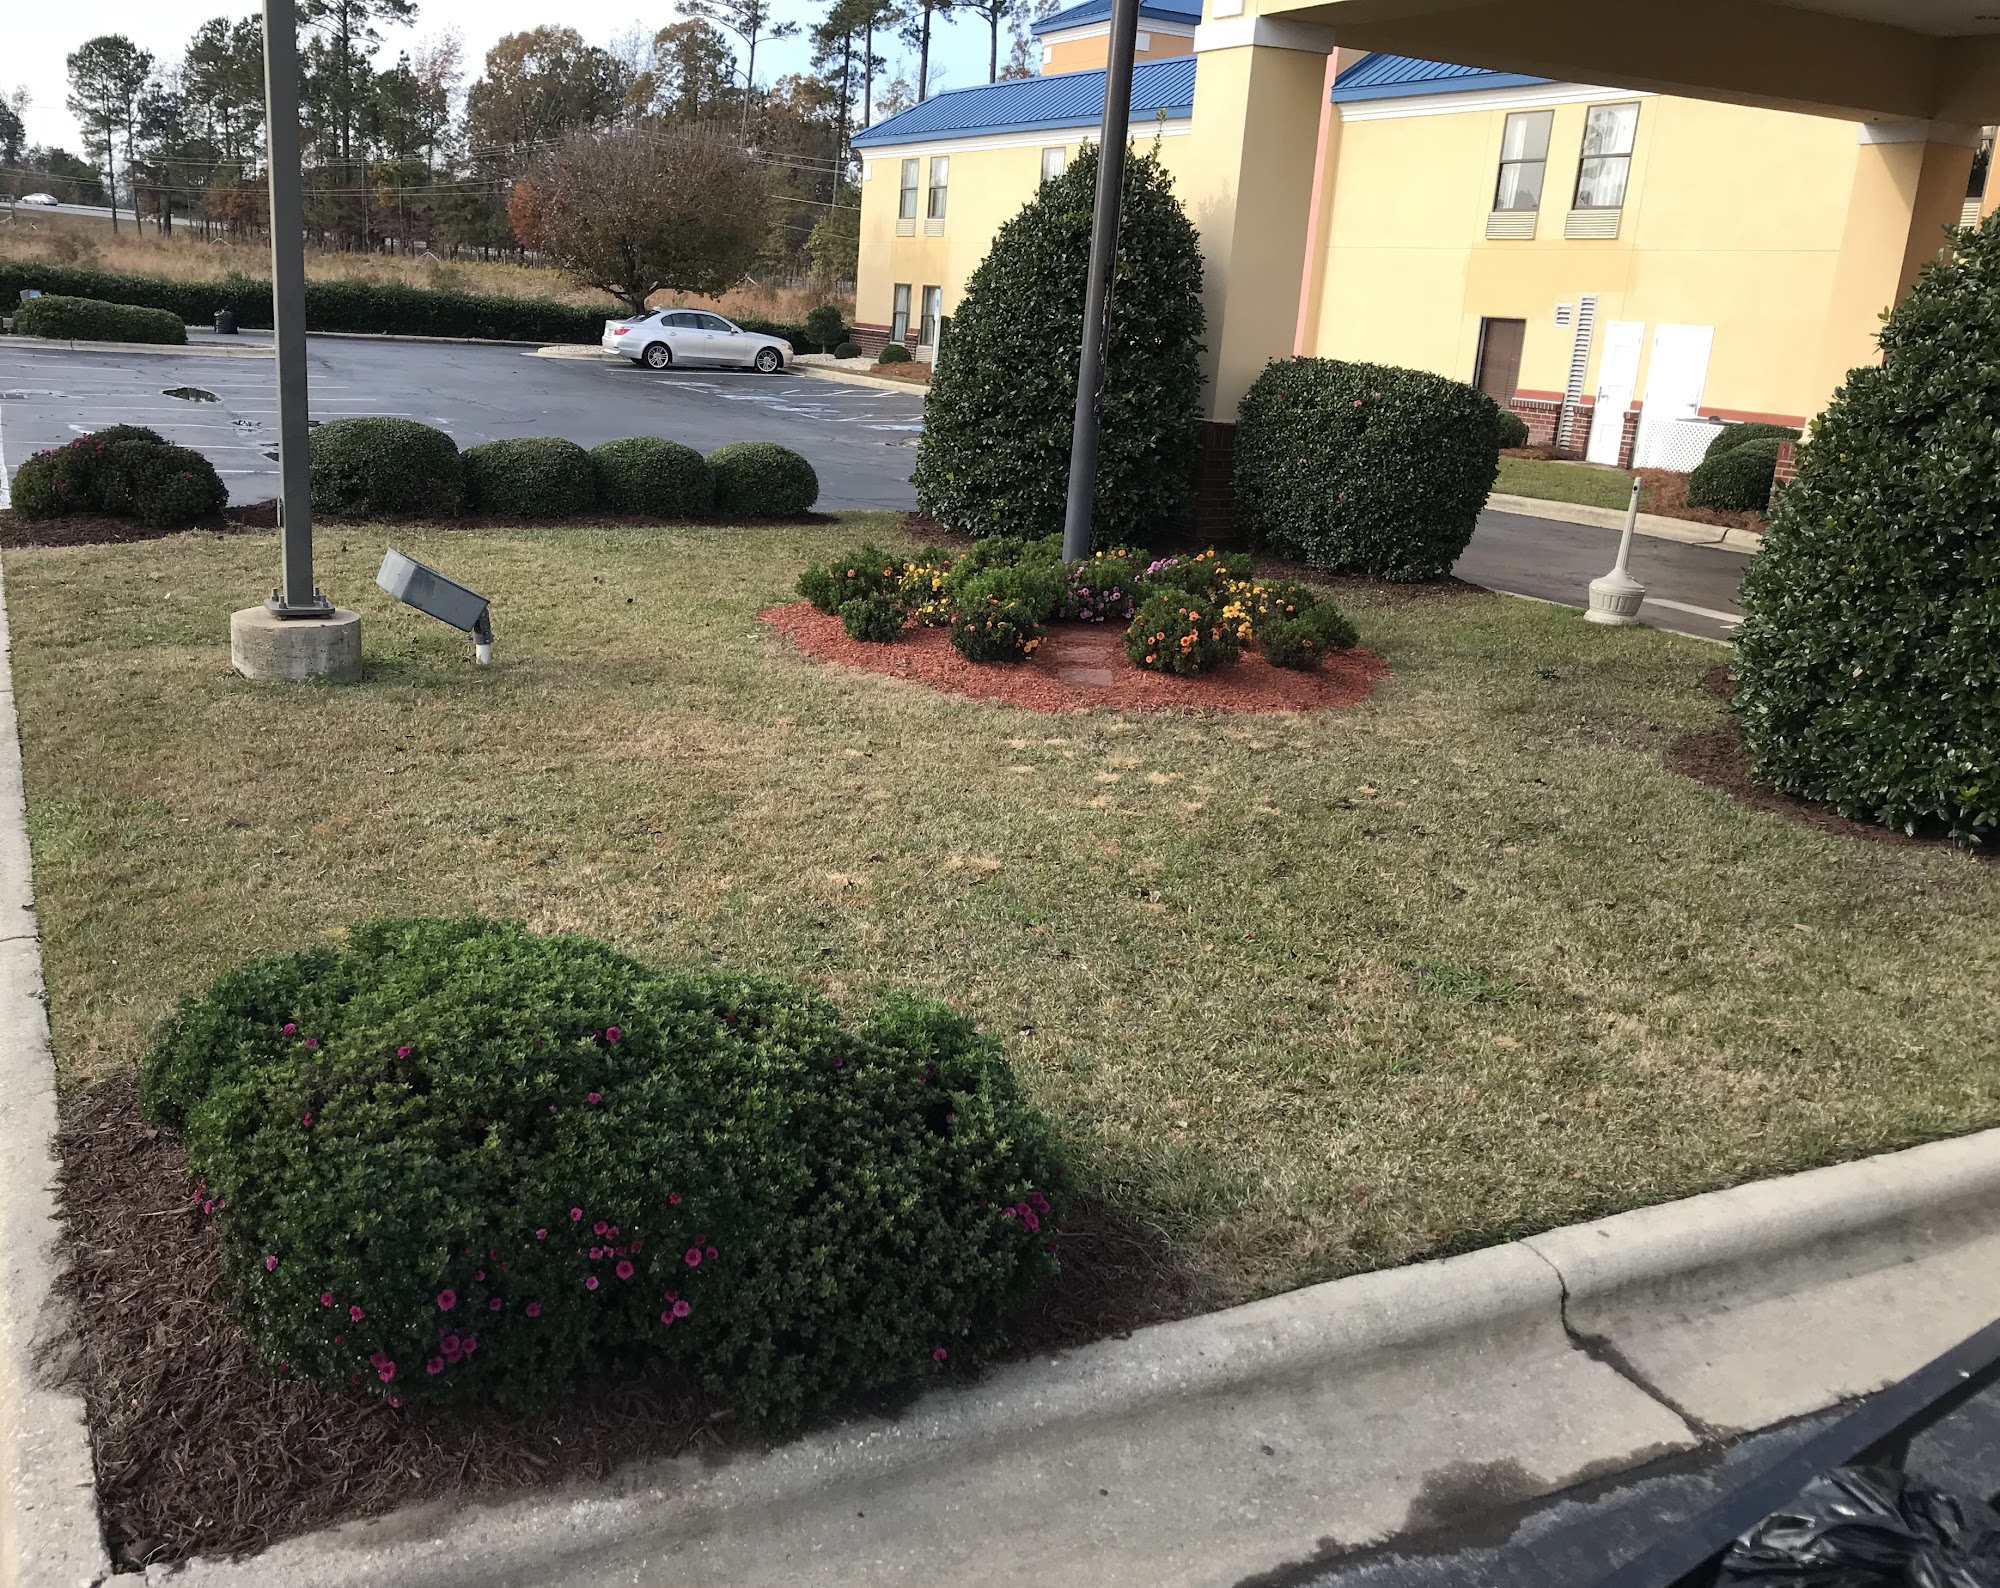 A&D Lawn care maintenance and more llc 9173, 402 Rest-A-Bit Rd, Tarboro North Carolina 27886